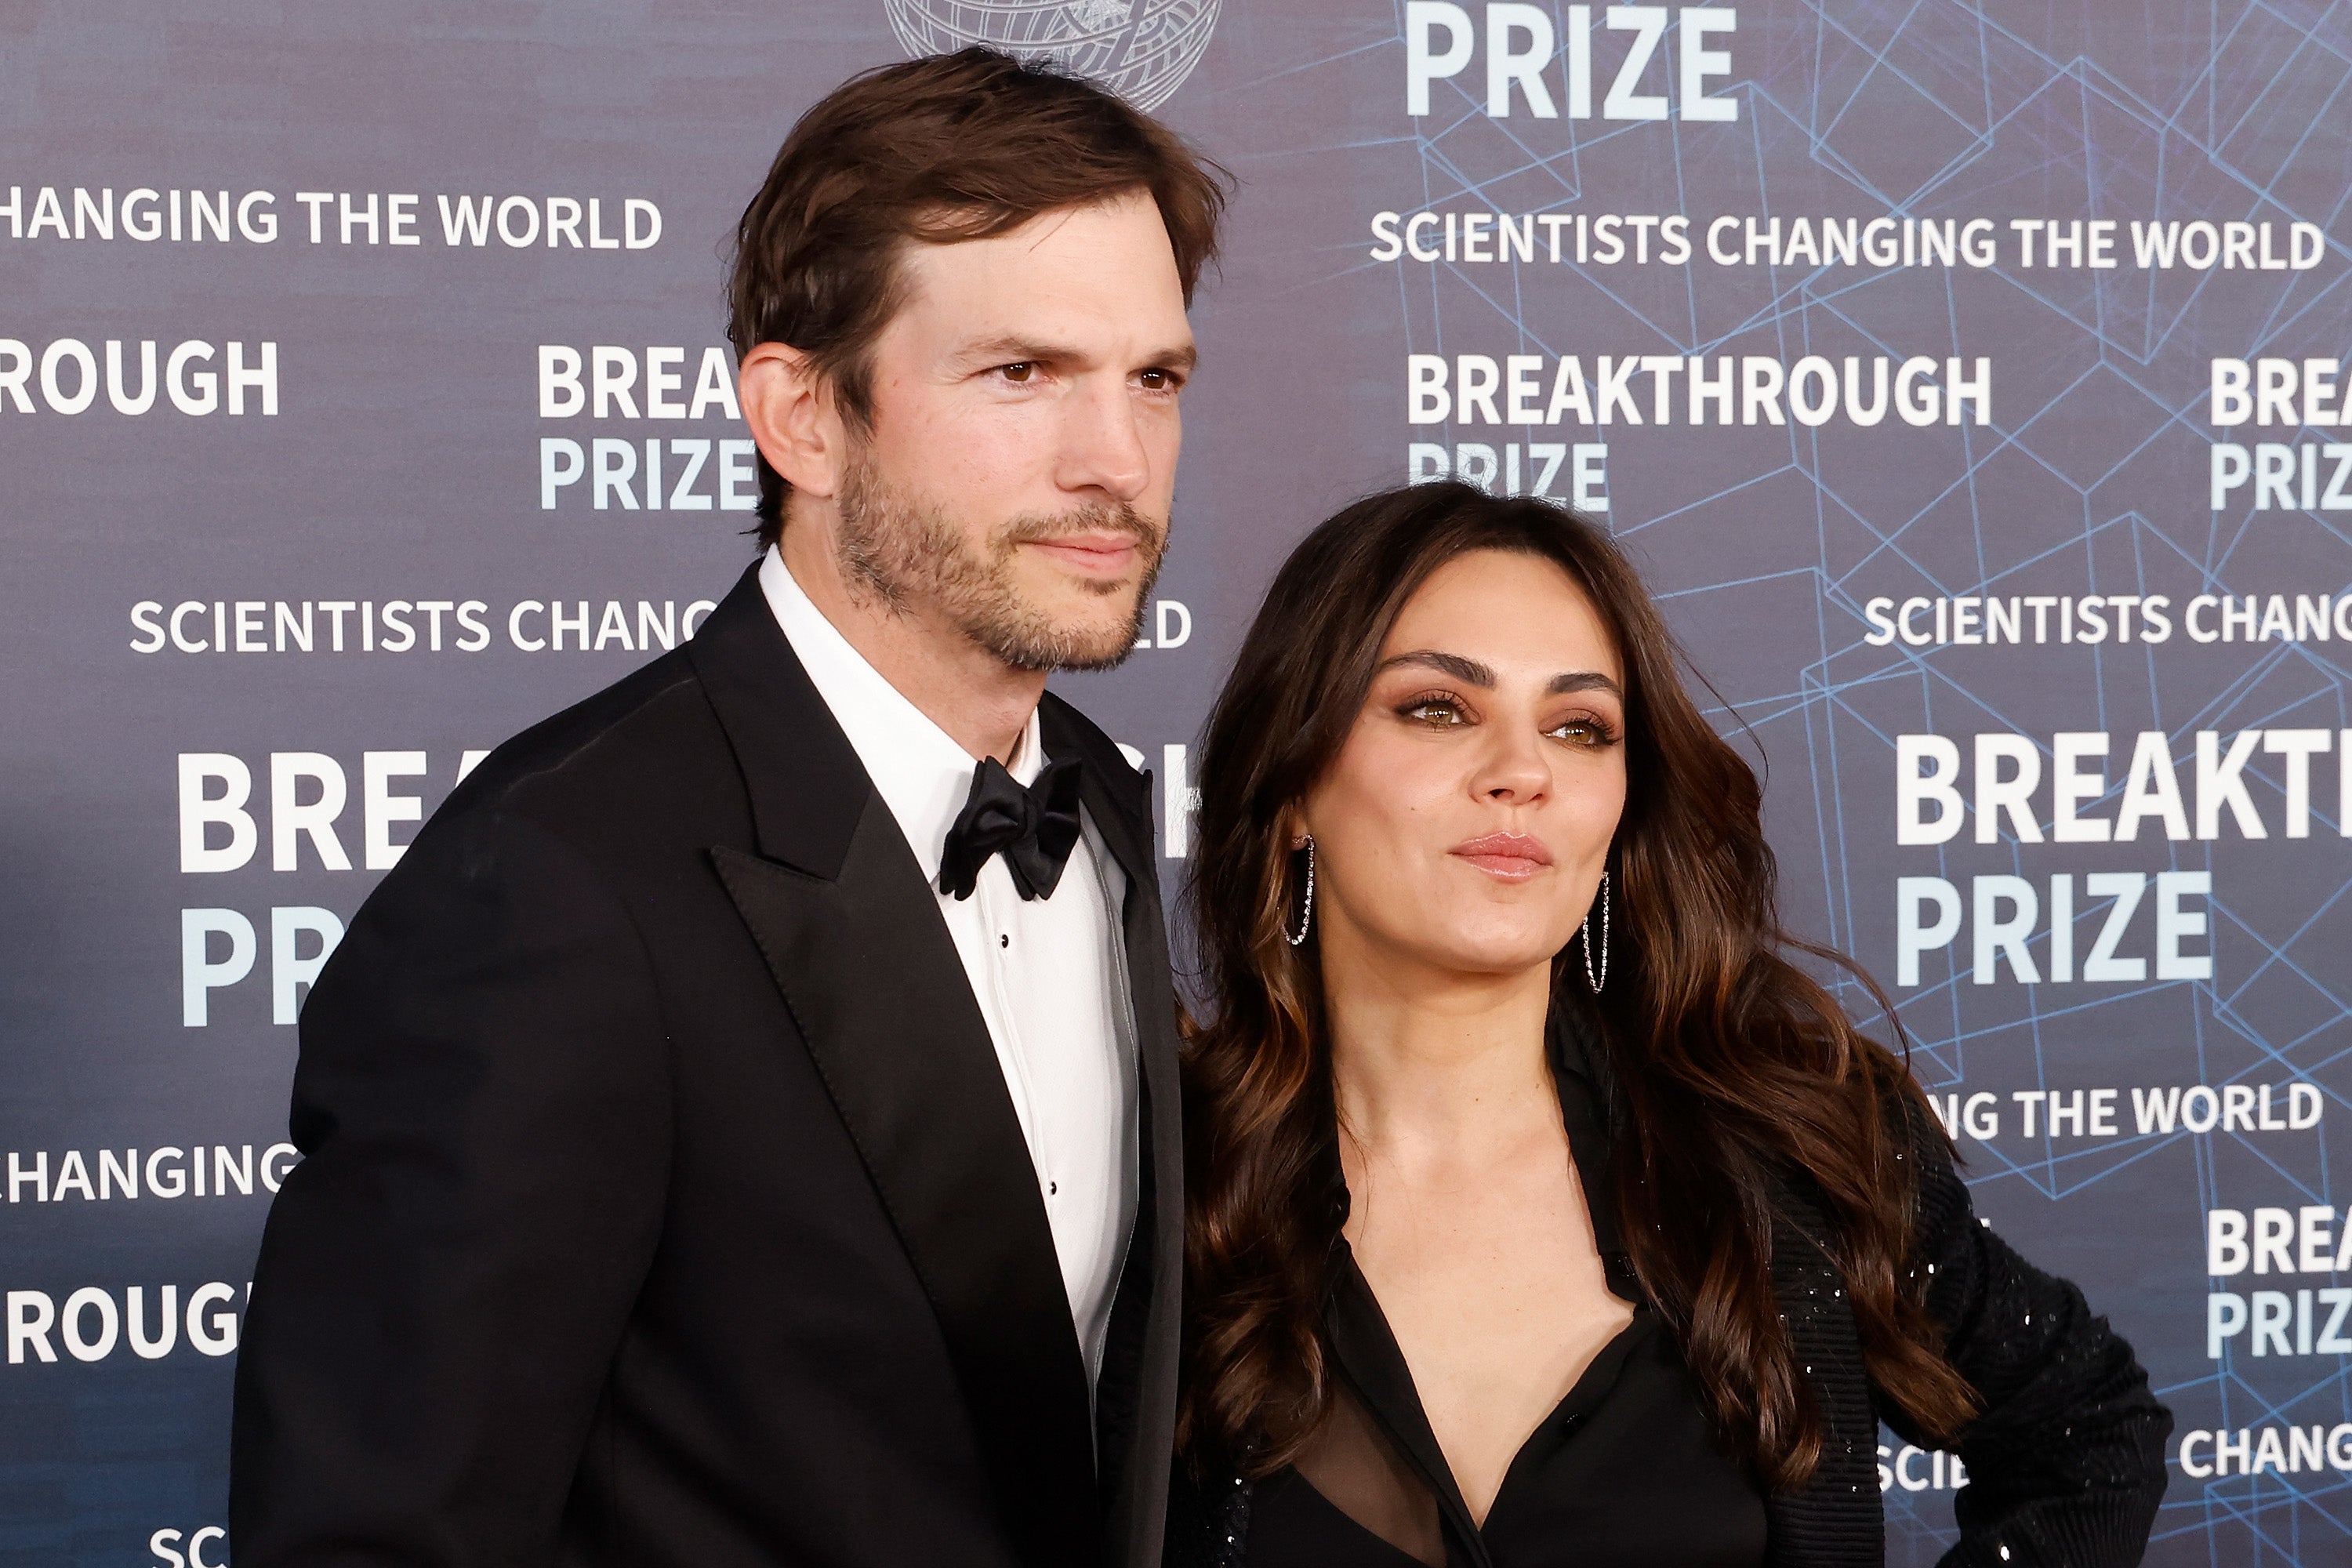 Here’s Why Mila Kunis And Ashton Kutcher Won’t Be Returning For Season 2 Of “That ‘90s Show”